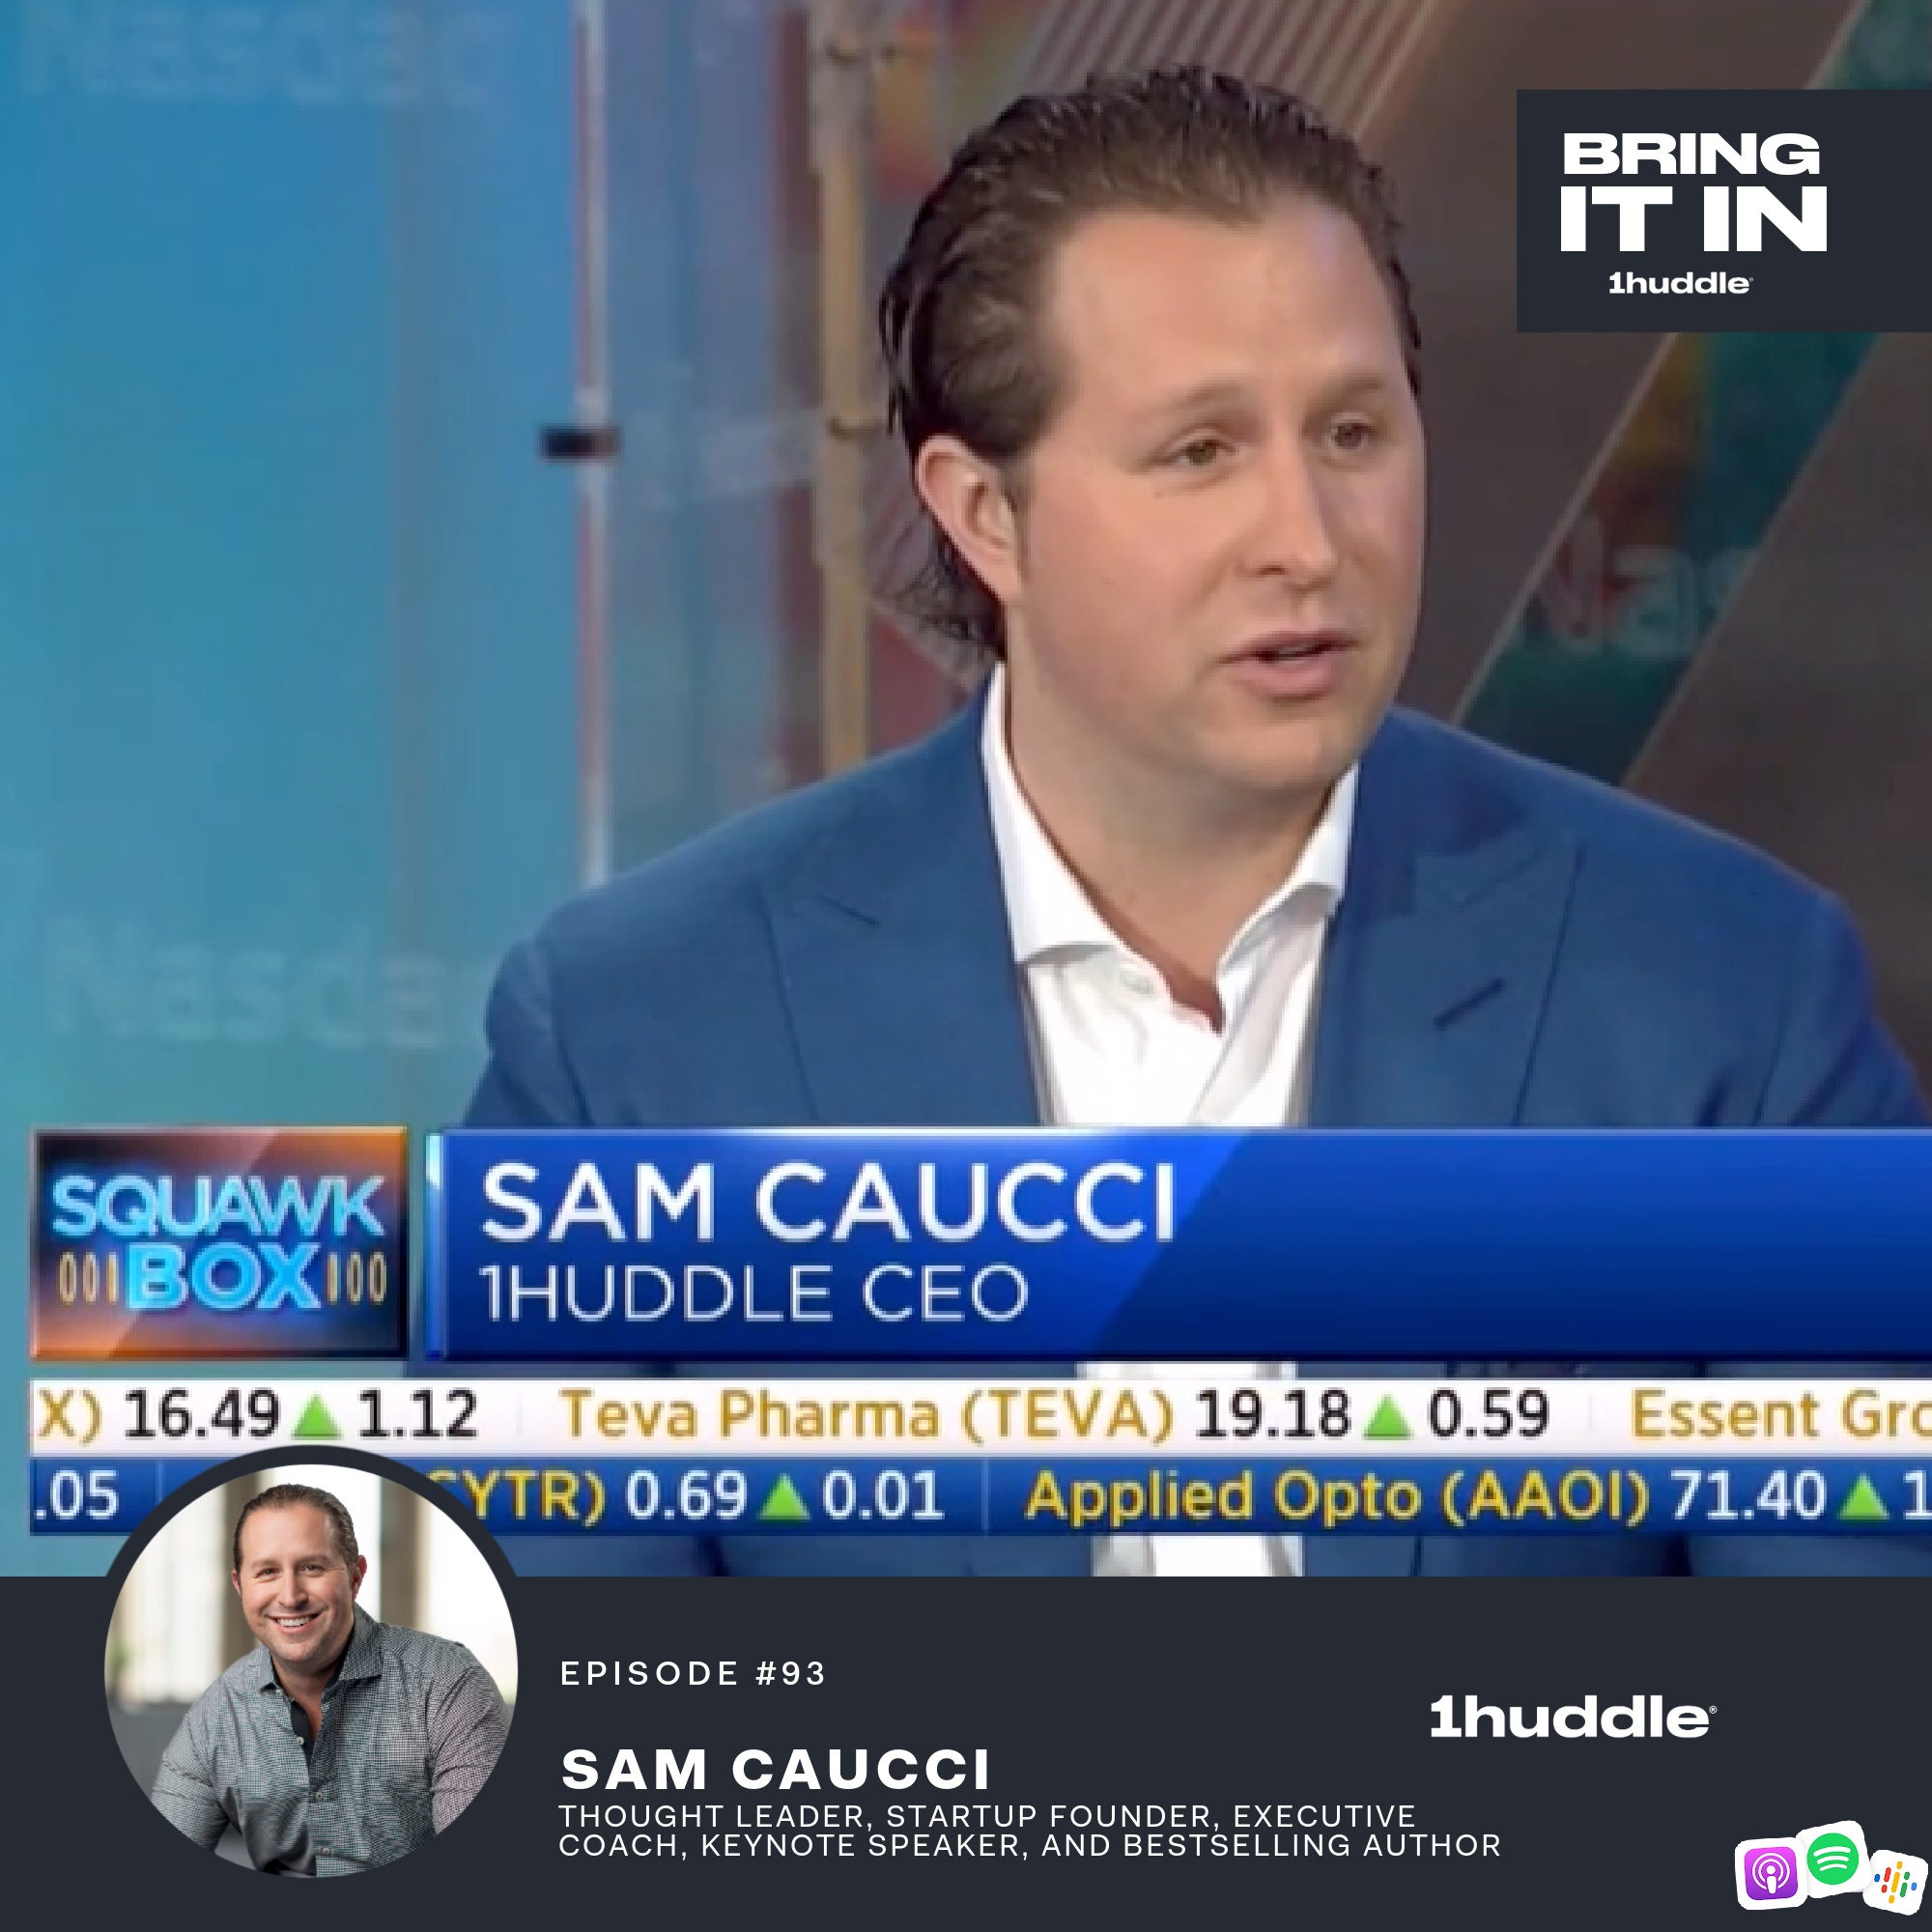 Sam Caucci, Founder & CEO of 1Huddle, Thought Leader, Executive Coach, Keynote Speaker, and Bestselling Author